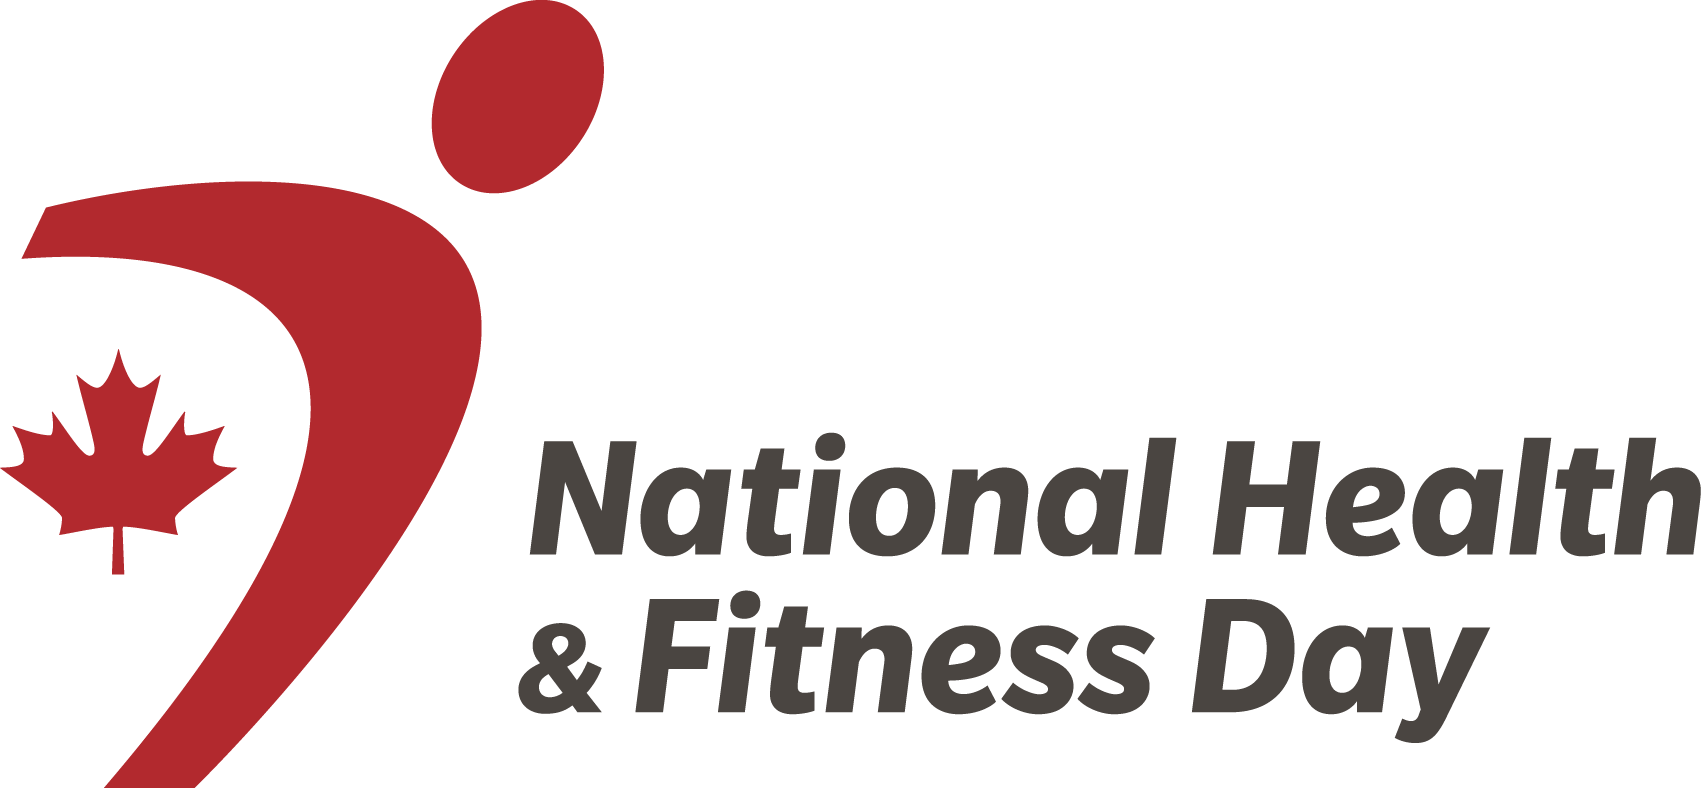 National fitness and health day logo